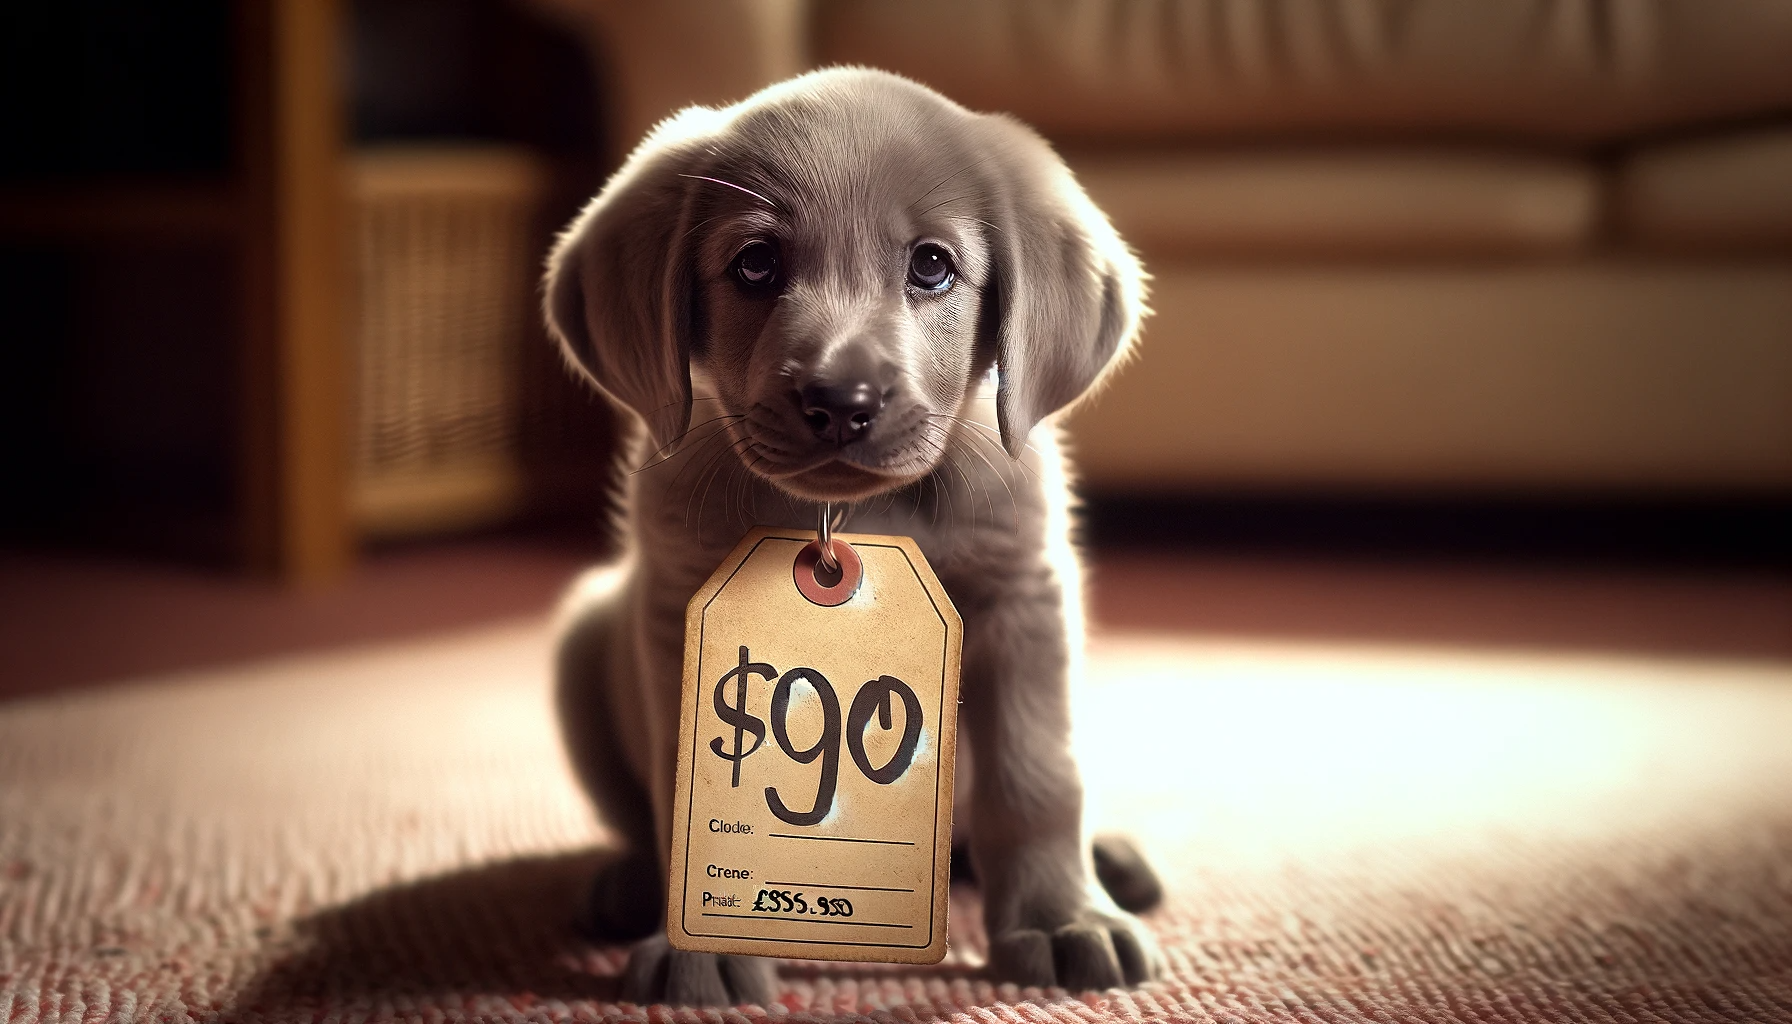 Price tag hanging from a Labmaraner puppy's collar